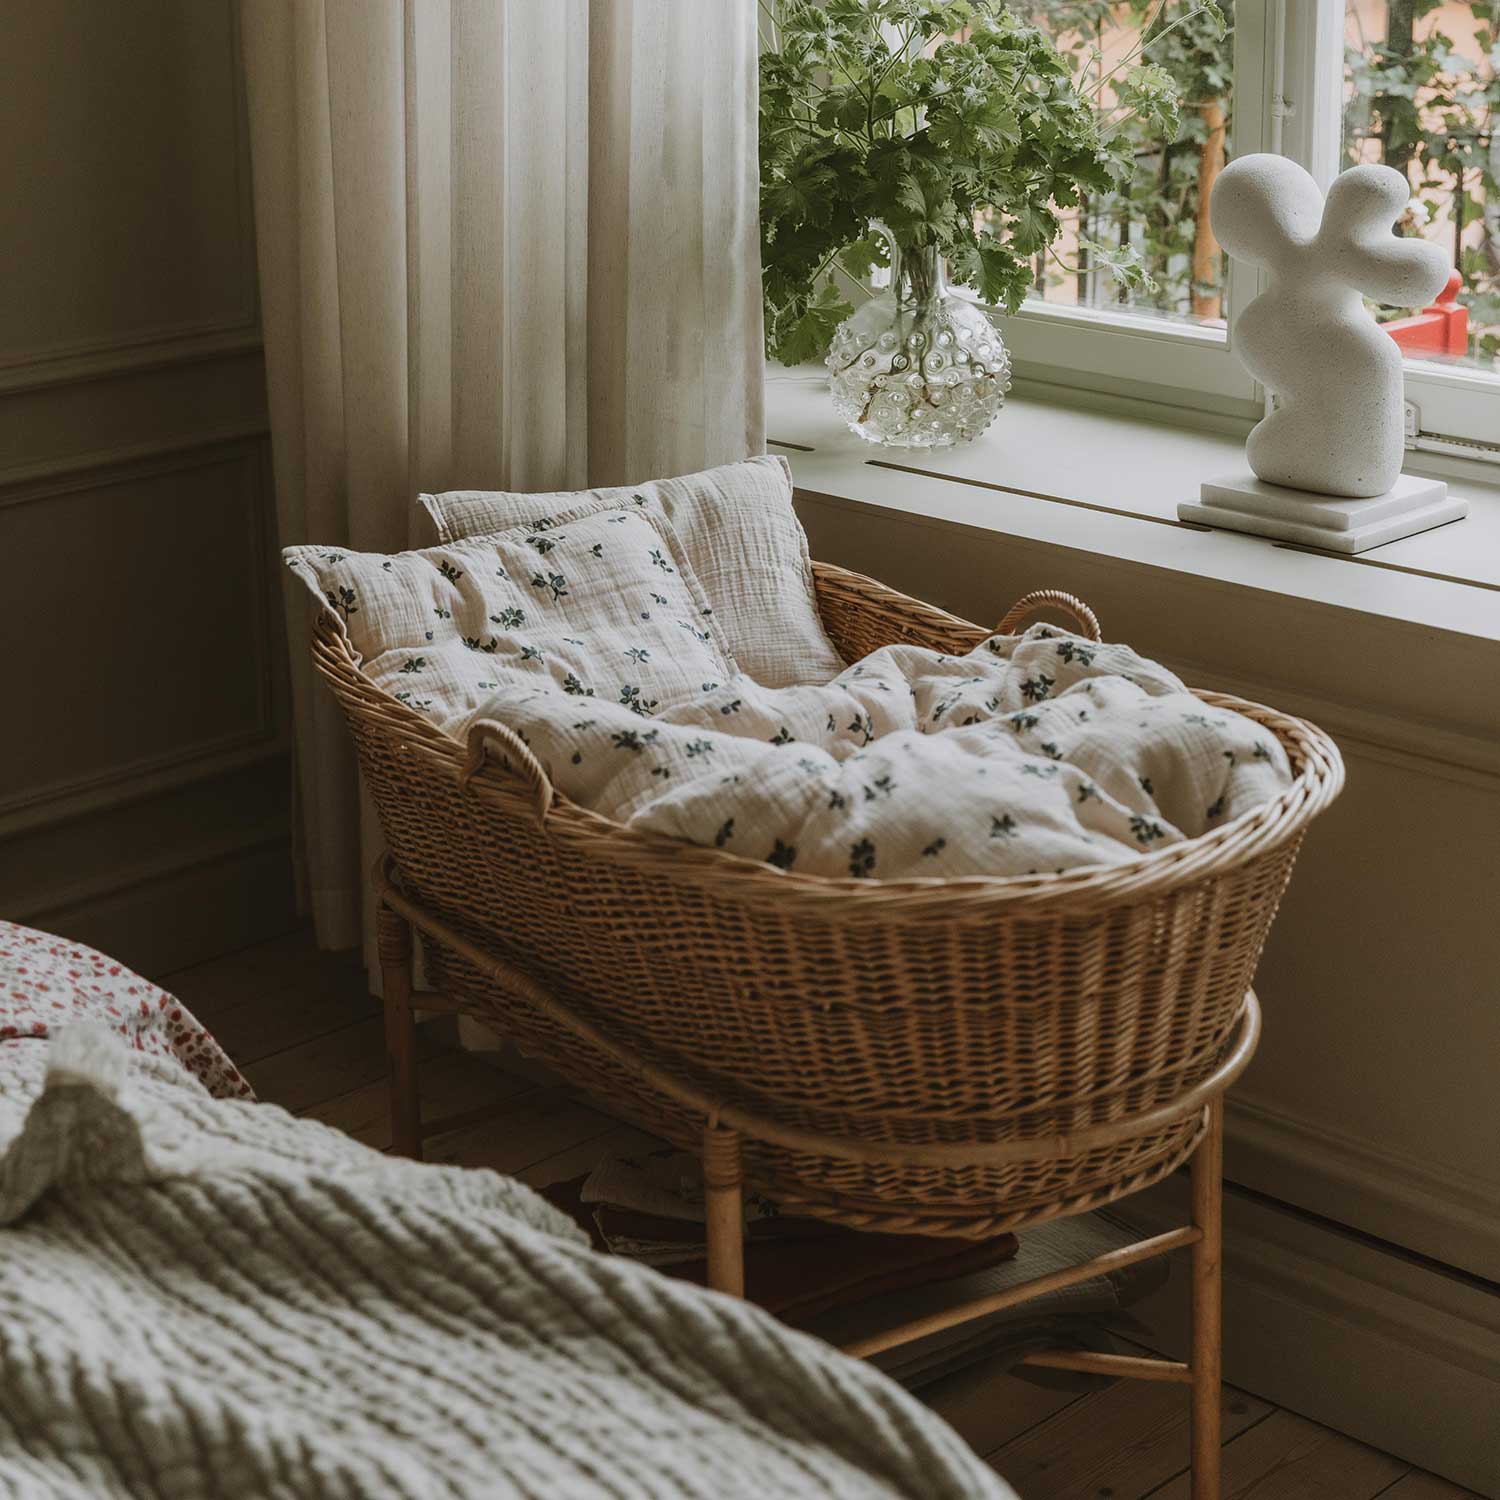 Garbo&Friends’ sustainable bedding products